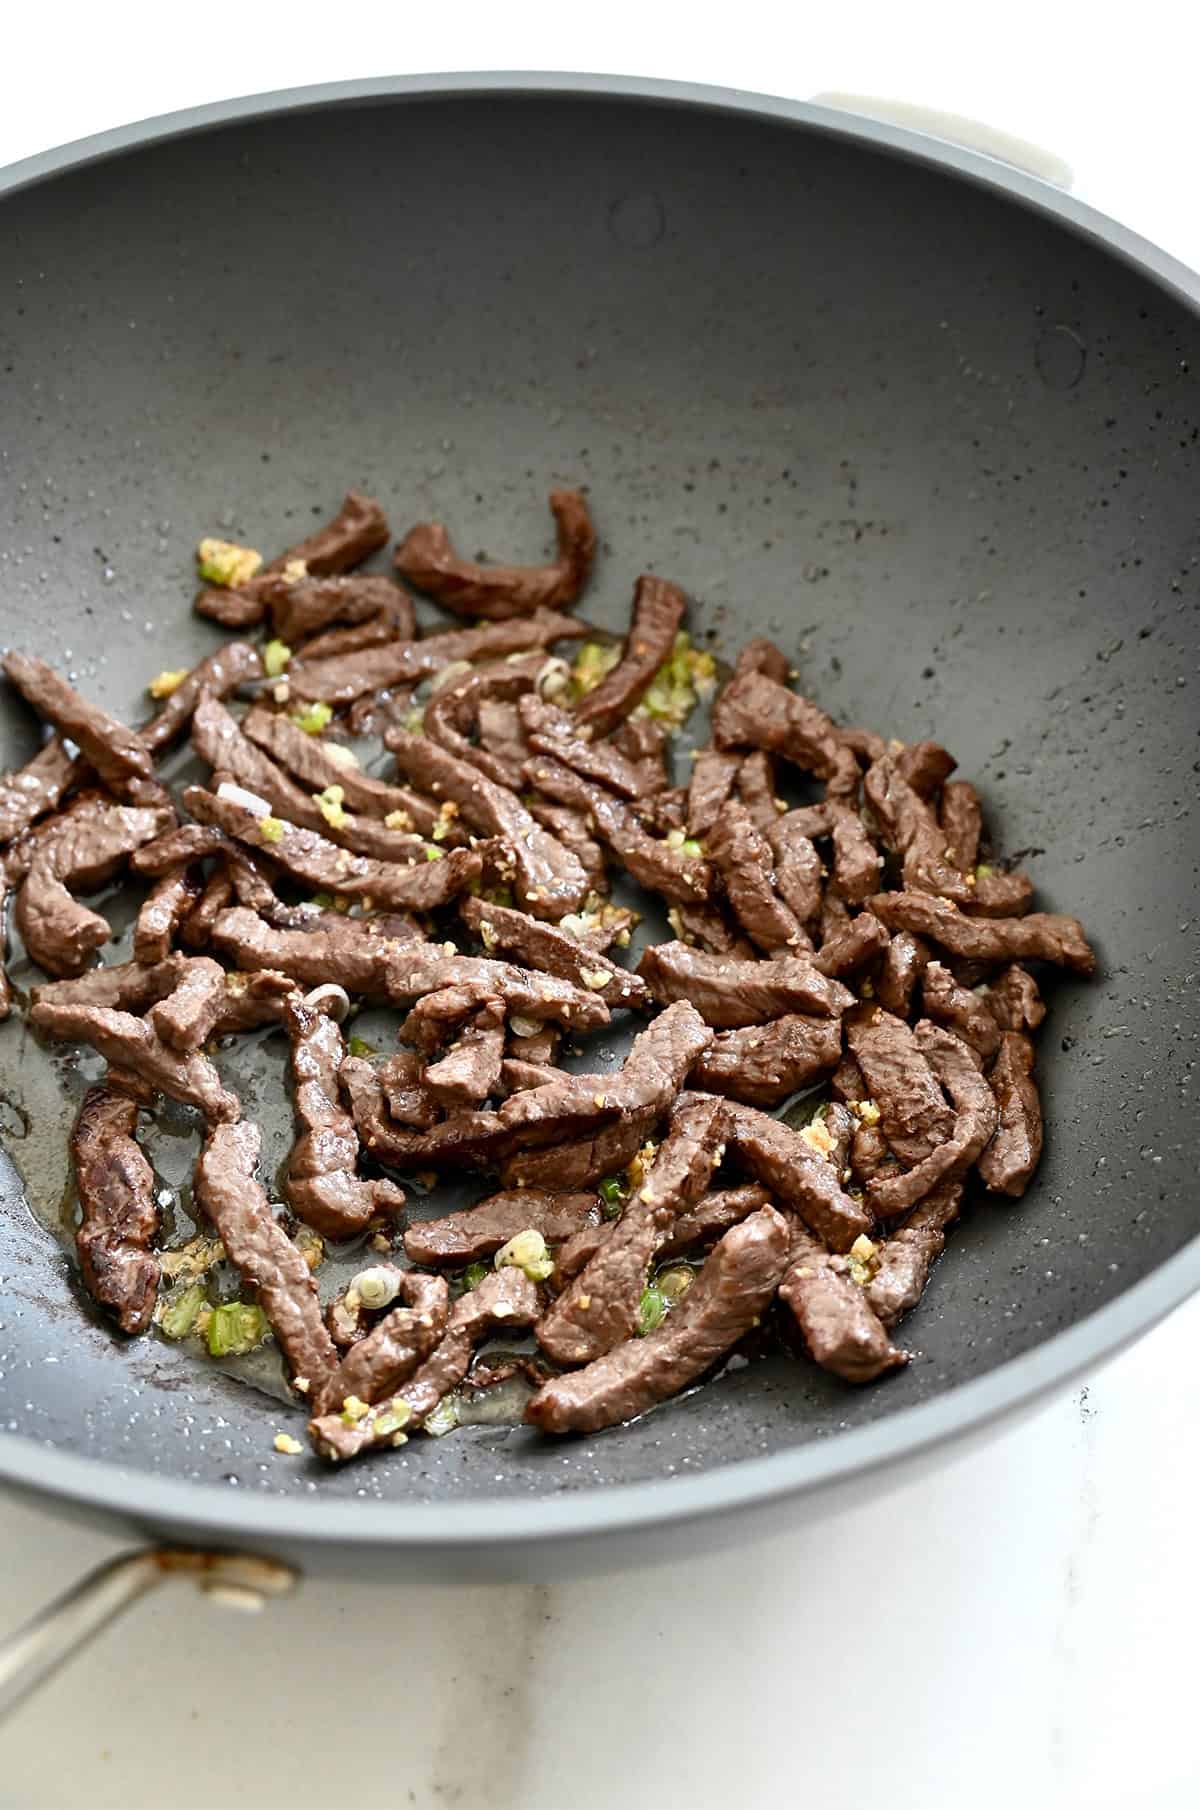 Cooked strips of beef and minced garlic in a wok.